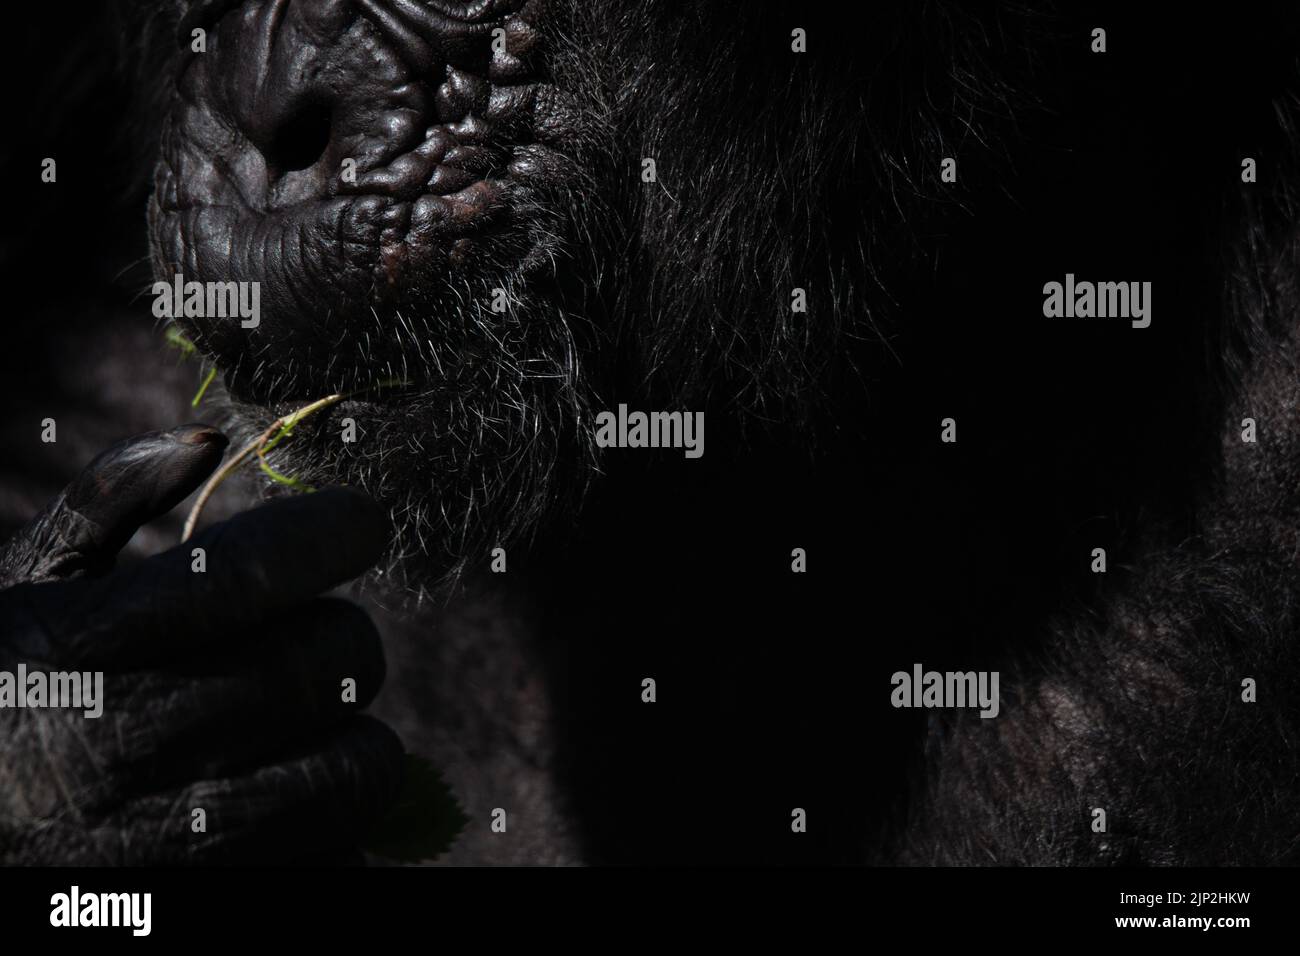 Detail of the hands and the mouth of a chimpanzee eating a leaf in the dark Stock Photo